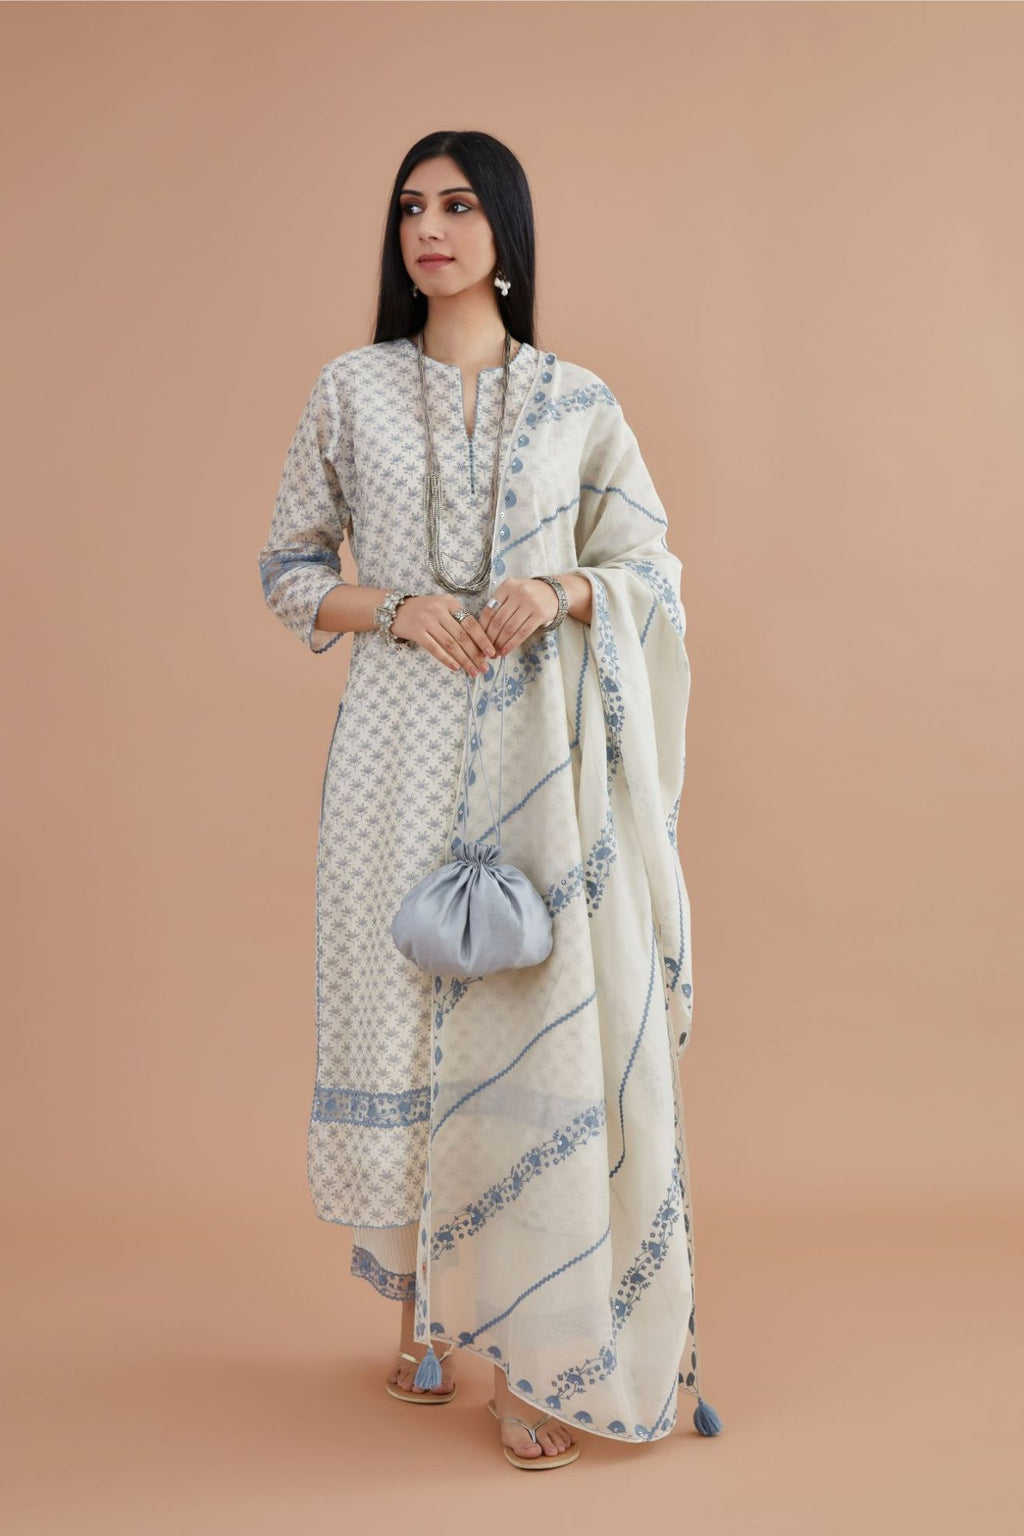 Off white silk chander kurta set with blue lotus hand block print, highlighted with blue thread embroidery inset and rickrack lace